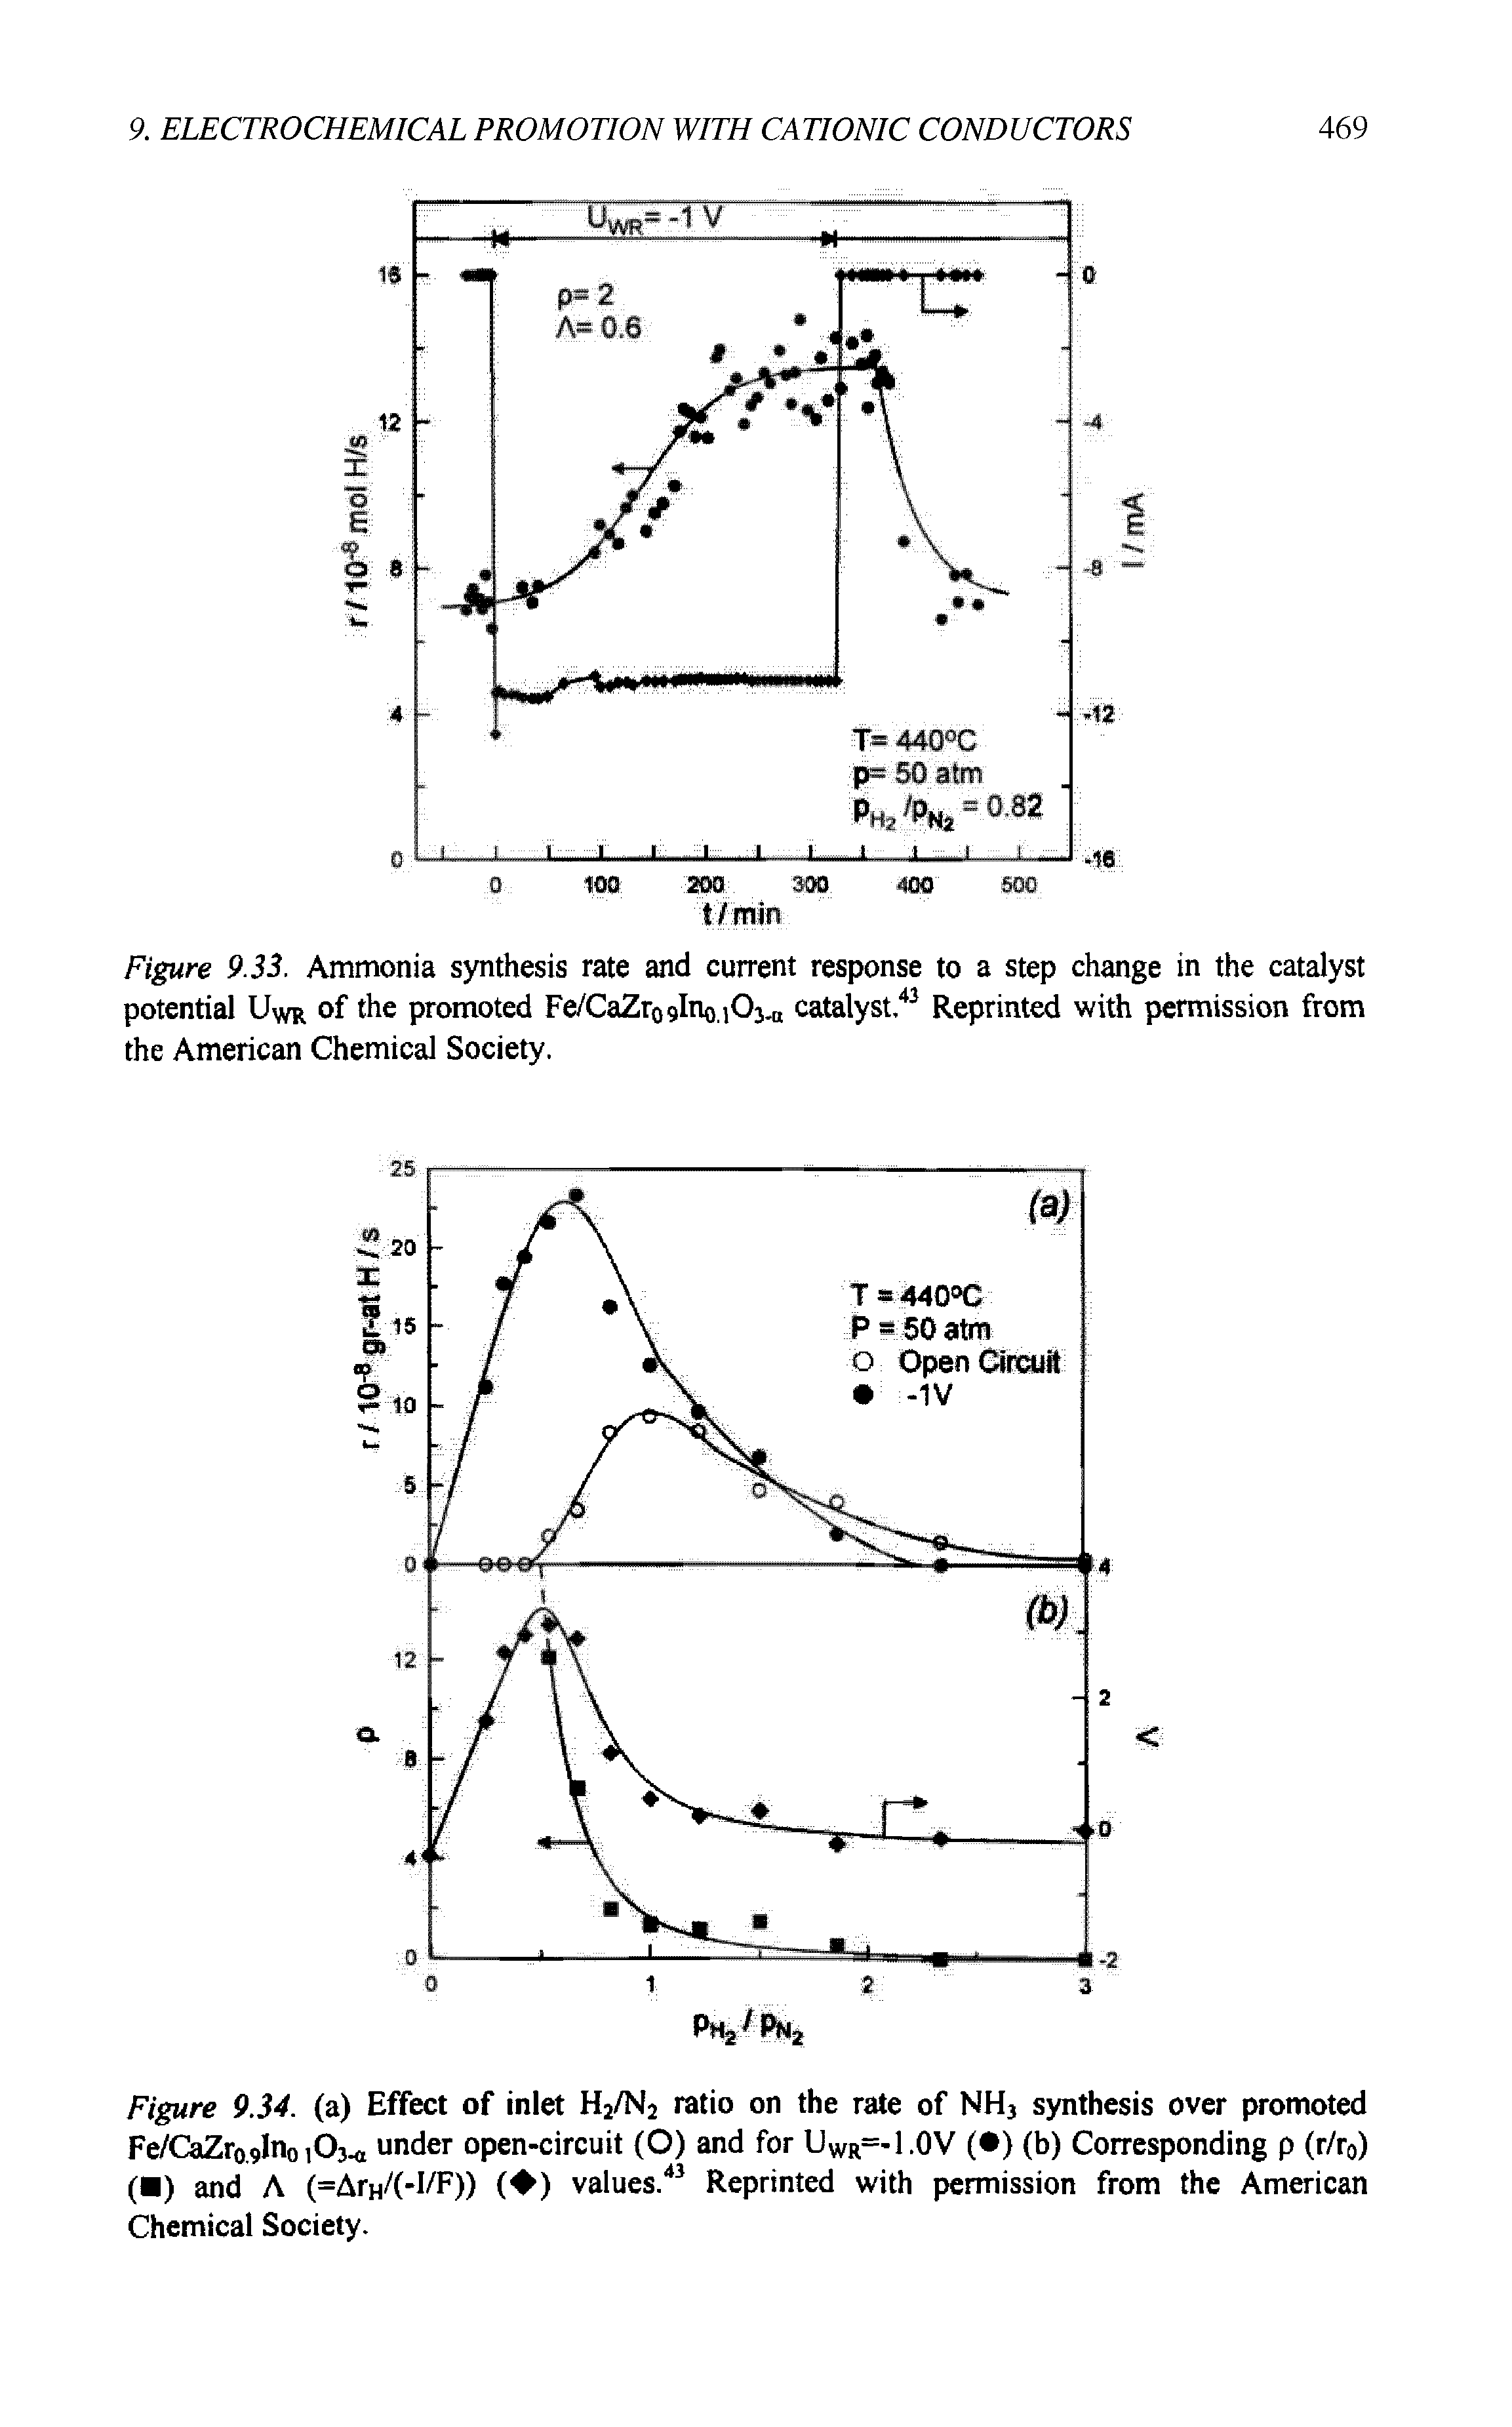 Figure 9.33. Ammonia synthesis rate and current response to a step change in the catalyst potential Uwr of the promoted Fe/CaZro9lno, Oj.u catalyst,43 Reprinted with permission from the American Chemical Society.